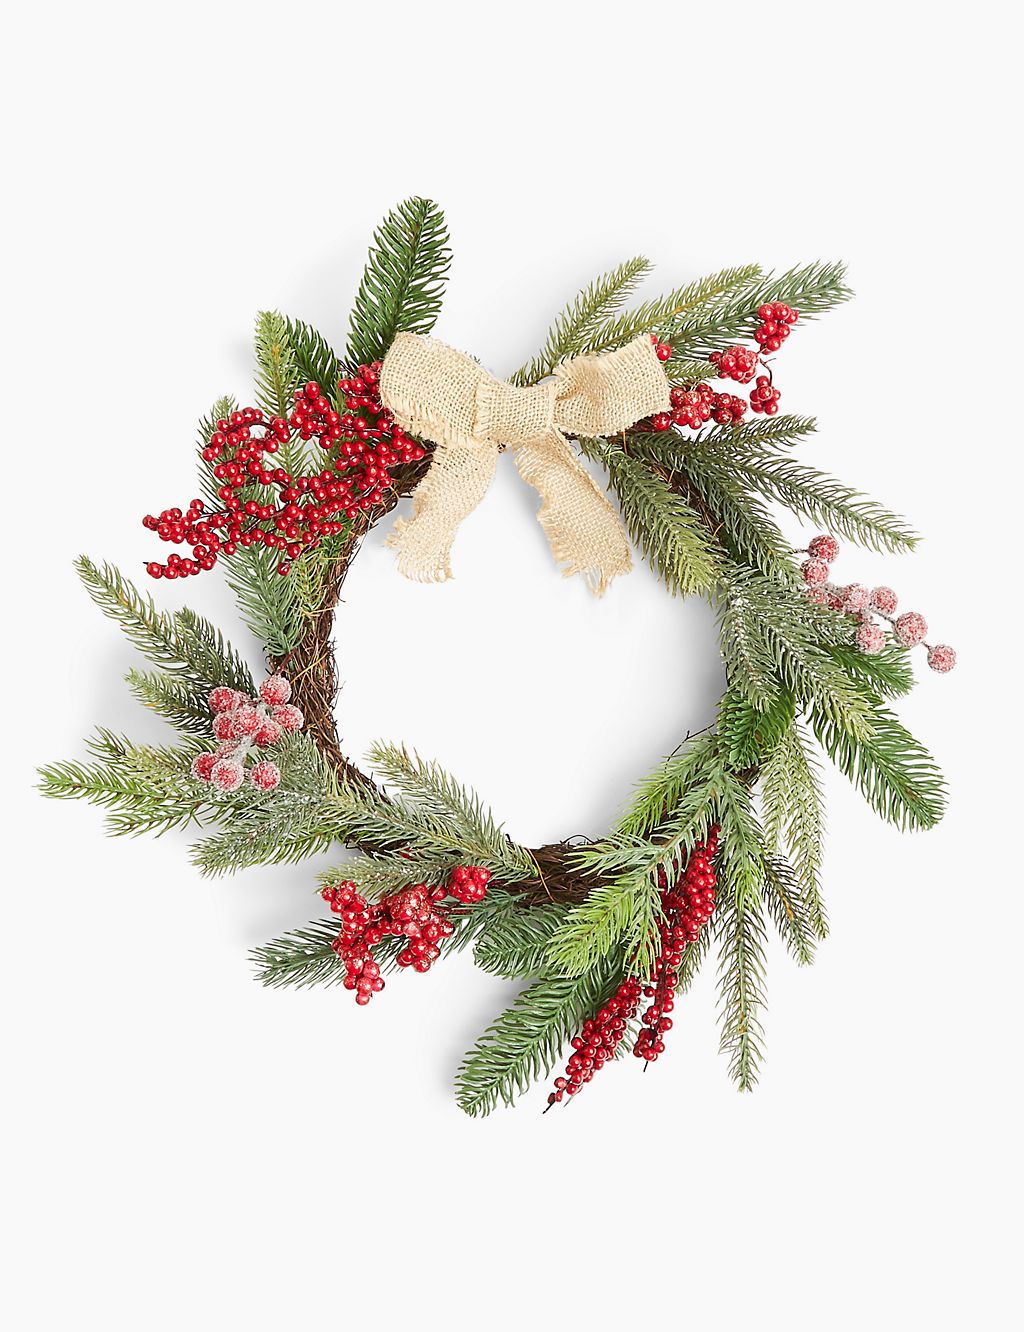 Make Your Own Wreath 4 of 4